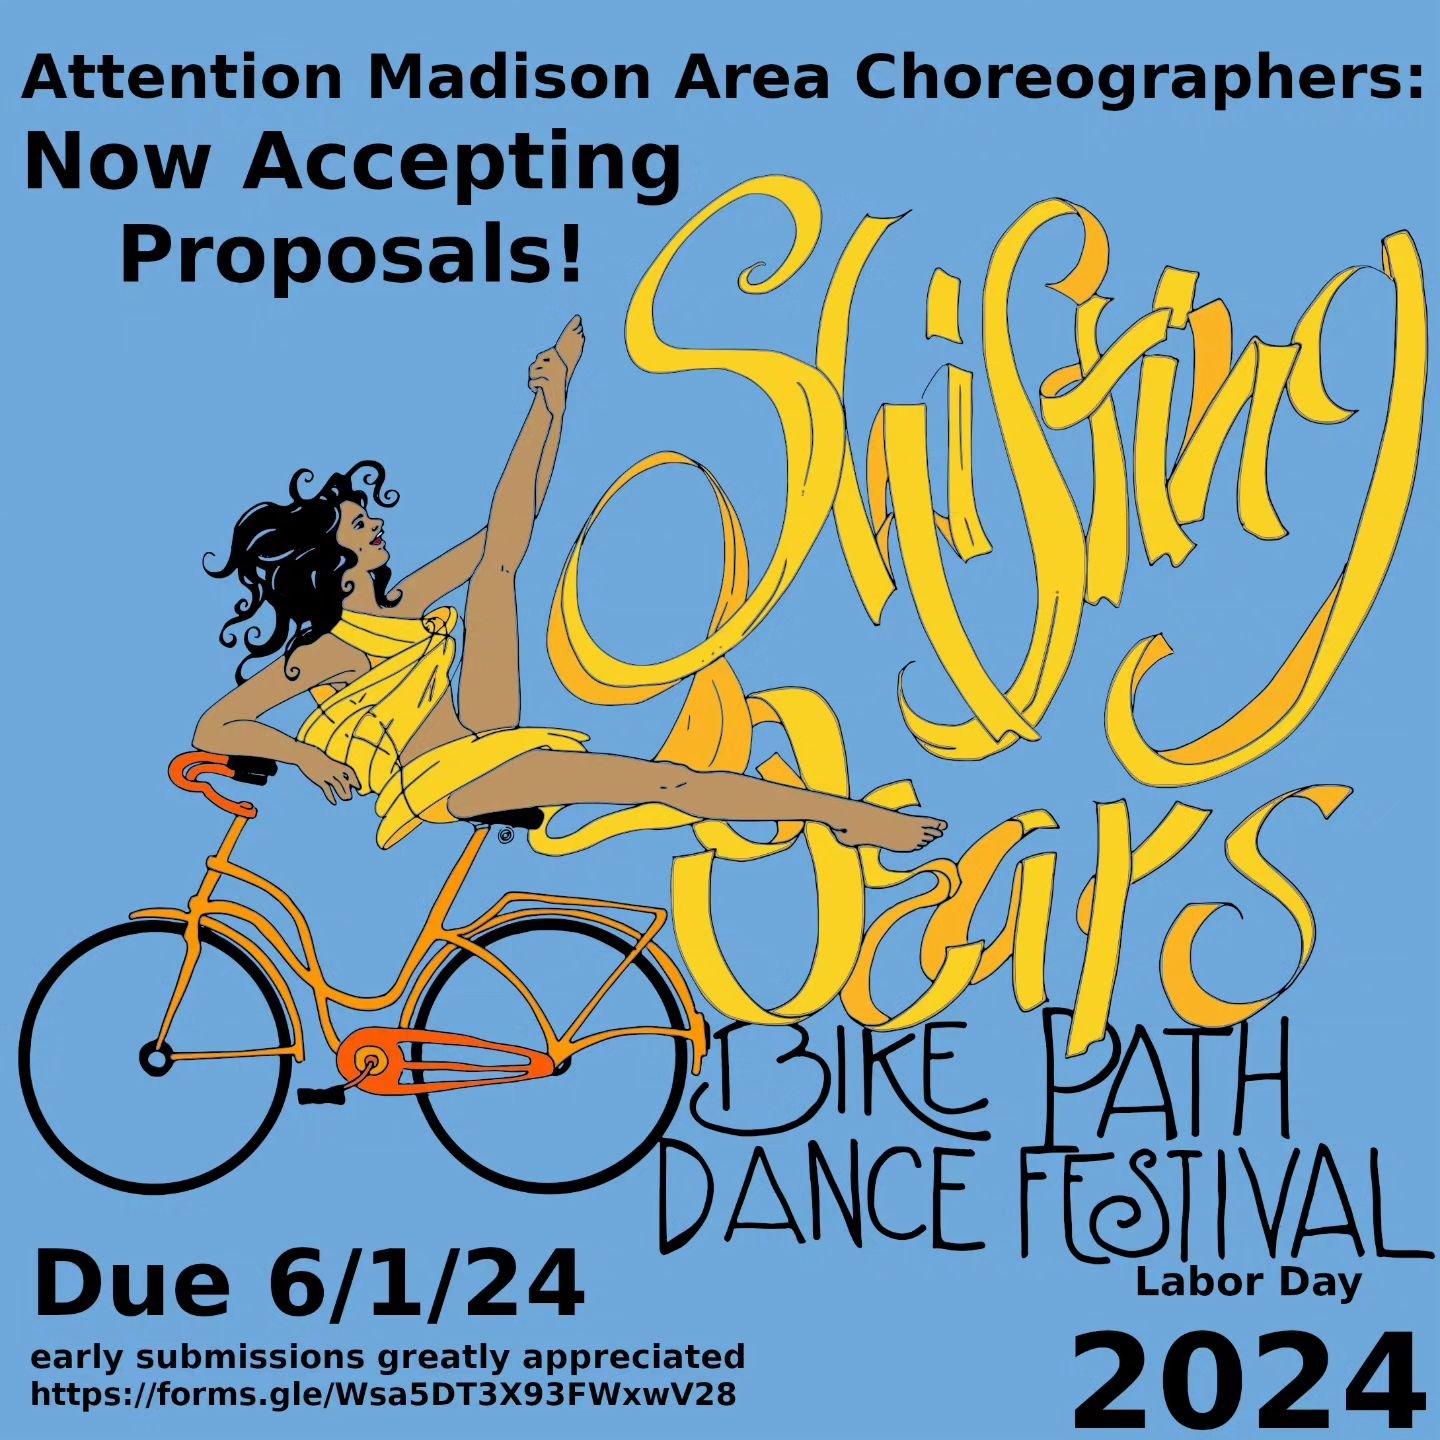 Shifting Gears Bike Path Dance Festival returns this Labor Day, 9/2/24, and we're excited to see your proposals.

Get in on the action and submit your proposal by June 1st (early submissions are greatly appreciated). Participating groups will be noti